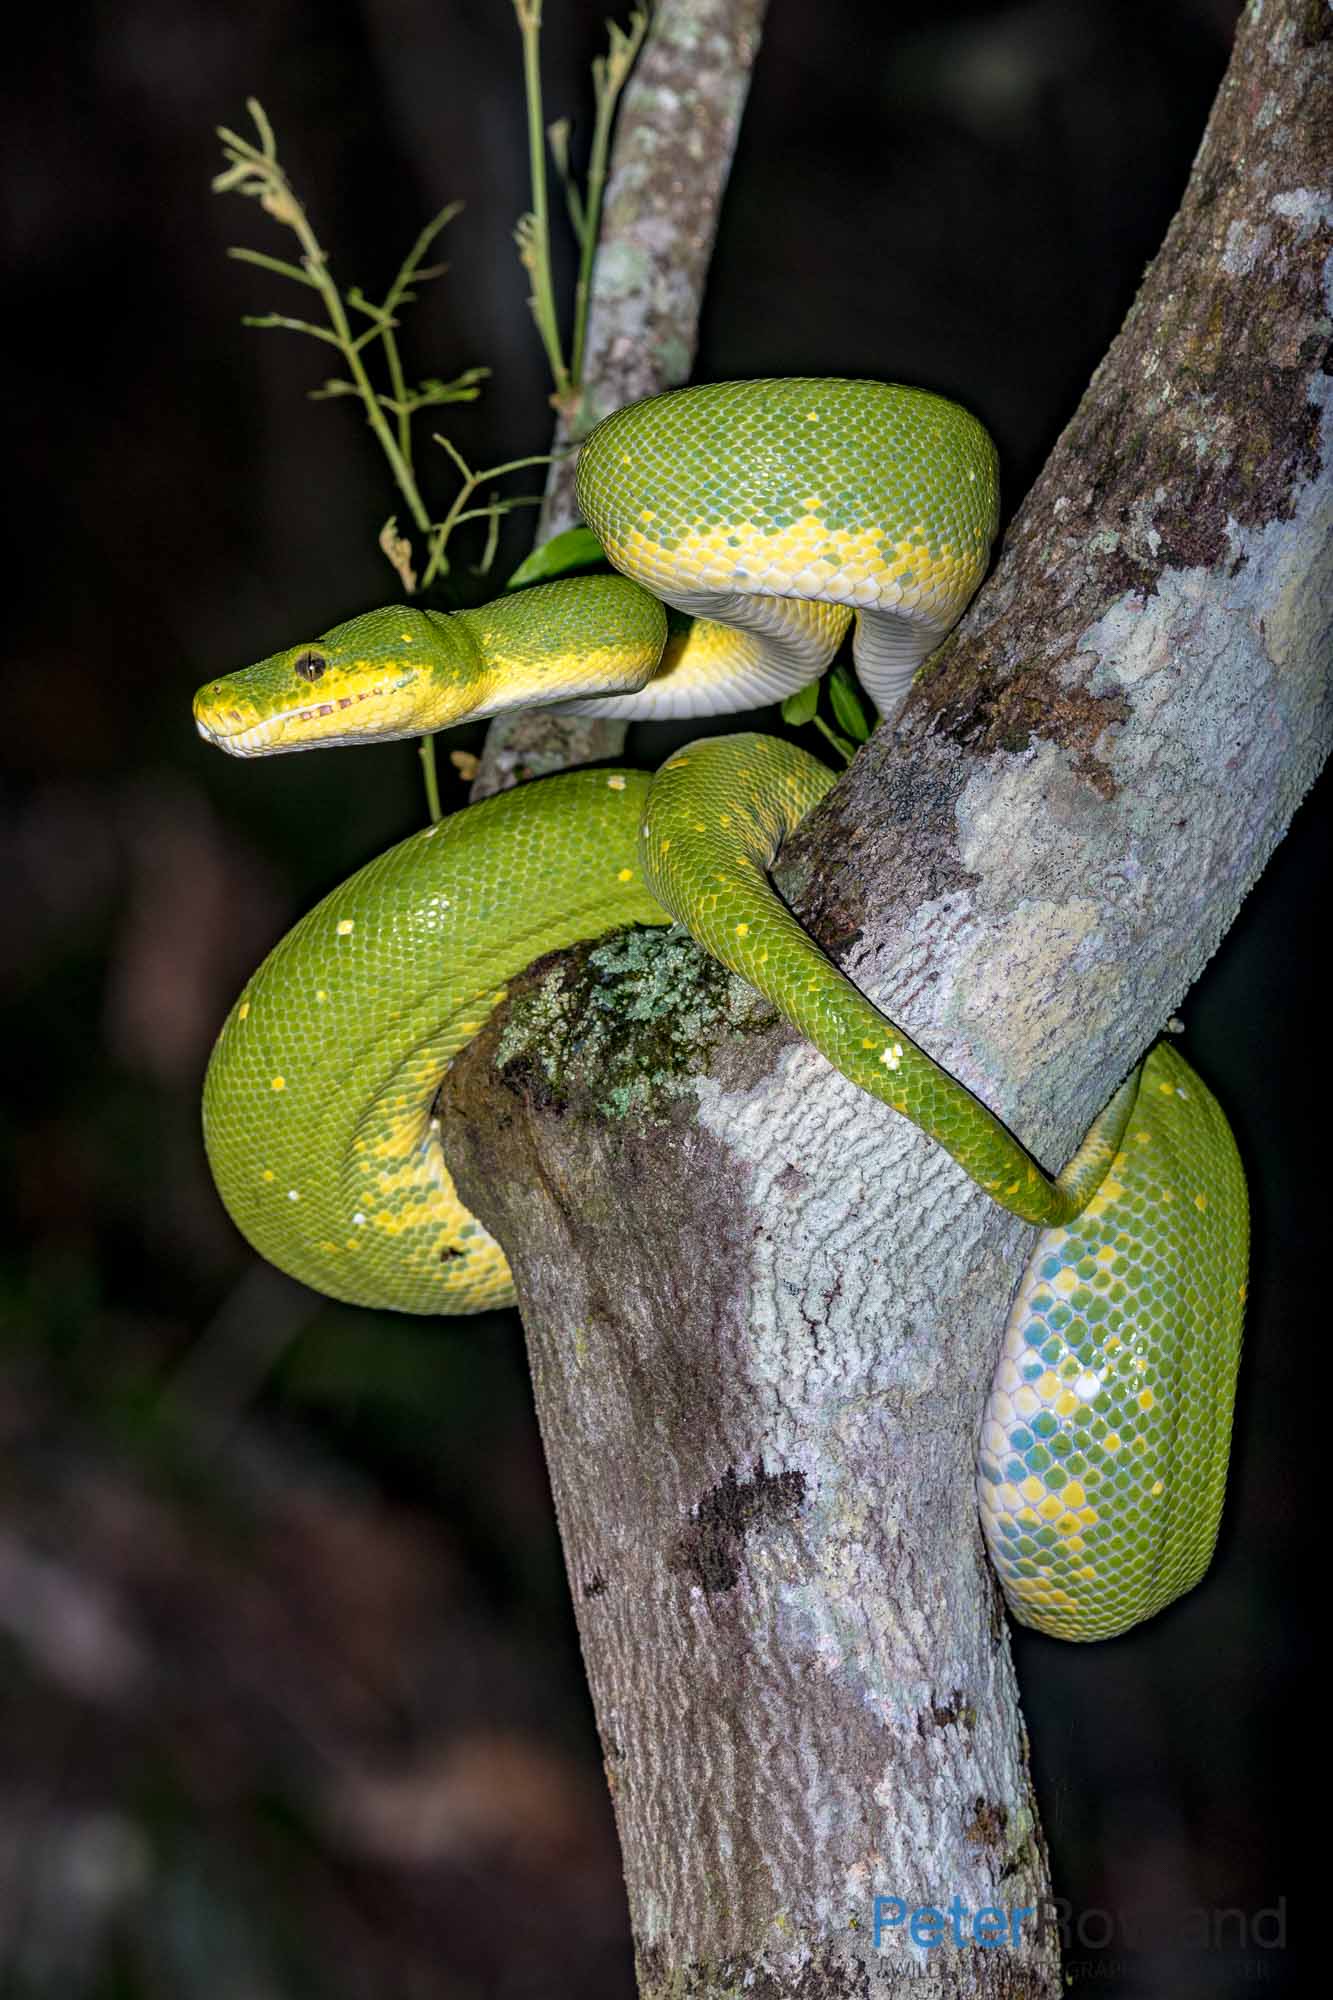 A Green Python curled around the trunk of a tree